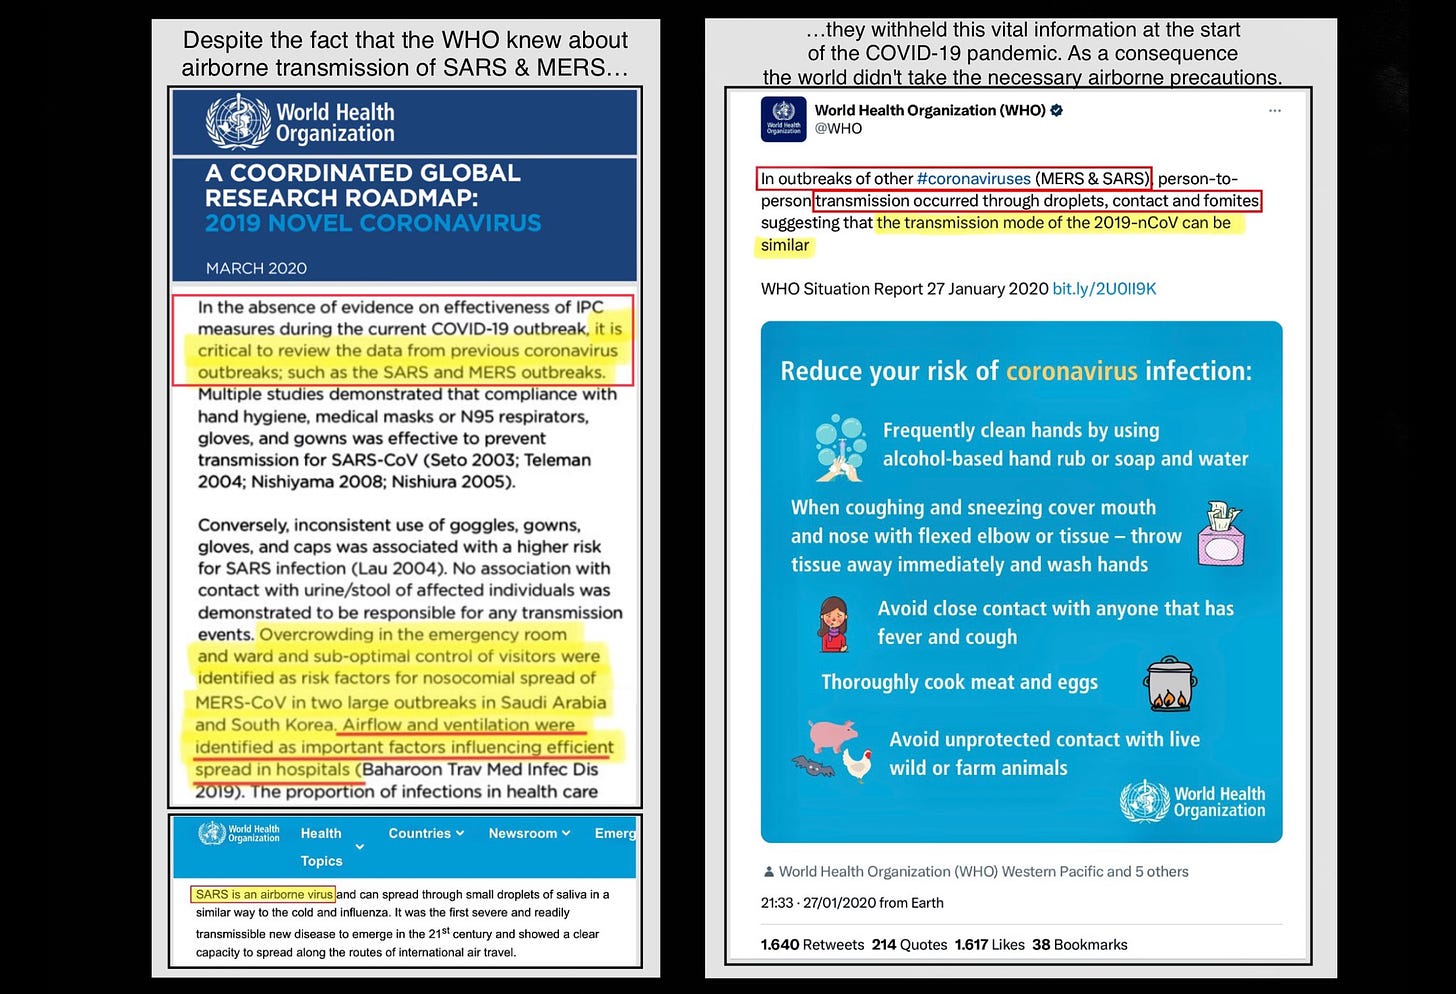 Images from World Health Organization documents. Caption at the top reads: “Despite the fact that the WHO knew about airborne transmission of SARS & MERS…they withheld this vital information at the start of the COVID-19 pandemic. As a consequence the world didn’t take the necessary airborne precautions.  The excerpted document text on the left is from the World Health Organization’s Coordinated Global Research Roadmap: 2019 Novel Coronavirus, published in March 2020. Text reads: “In the absence of evidence on effectiveness of IPC measures during the current COVID-19 outbreak, it is critical to review the data from previous coronavirus outbreaks; such as the SARS and MERS outbreaks. Multiple studies demonstrated that compliance with hand hygiene, medical masks or N95 respirators, gloves, and gowns was effective to prevent transmission for SARS-CoV (Seto 2003; Teleman 2004; Nishiyama 2008; Nishiura 2005). Conversely, inconsistent use of googles, gowns, gloves, and caps was associated with a higher risk for SARS infection (Lau 2004). No association with contact with urine/stool of affected individuals was demonstrated to be responsible for any transmission events. Overcrowding in the emergency room and ward and sub-optimal control of visitors were identified as risk factors for nosocomial spread of MERS-CoV in two large outbreaks in Saudi Arabia and South Korea. Airflow and ventilation were identified as important factors influencing efficient spread in hospitals (Baharoom Trav Med Infec Dis 2019). The proportion of infections in health care[…]  Screenshotted excerpt of text from the WHO website reads: “SARS is an airborne virus and can spread through small droplets of saliva in a similar way to the cold and influenza. It was the first severe and readily transmissible disease to emerge in the 21st century and showed a clear capacity to spread along the routes of international air travel.  A screenshot of a tweet from the World Health Organization (@WHO) posted on 01/27/2020. Text reads: “In outbreaks of other #coronaviruses (MERS & SARS), person-to-person transmission occurred through droplets, contact and fomites, suggesting that the transmission mode of the 2019-nCoV can be similar WHO Situation Report 27 January 2020”  An infographic in the tweet has illustrations of a faucet, a Kleenex box, a sick person, a pot on a stove, and farm animals. Its text reads: “Reduce your risk of coronavirus infection: Frequently clean hands by using alcohol-based hand rub or soap and water. When coughing and sneezing cover mouth and nose with flexed elbow or tissue – throw tissue away immediately and wash hands. Avoid close contact with anyone that has fever and cough. Thoroughly cook meat and eggs. Avoid unprotected contact with live wild or farm animals.” The WHO logo is at the bottom.  